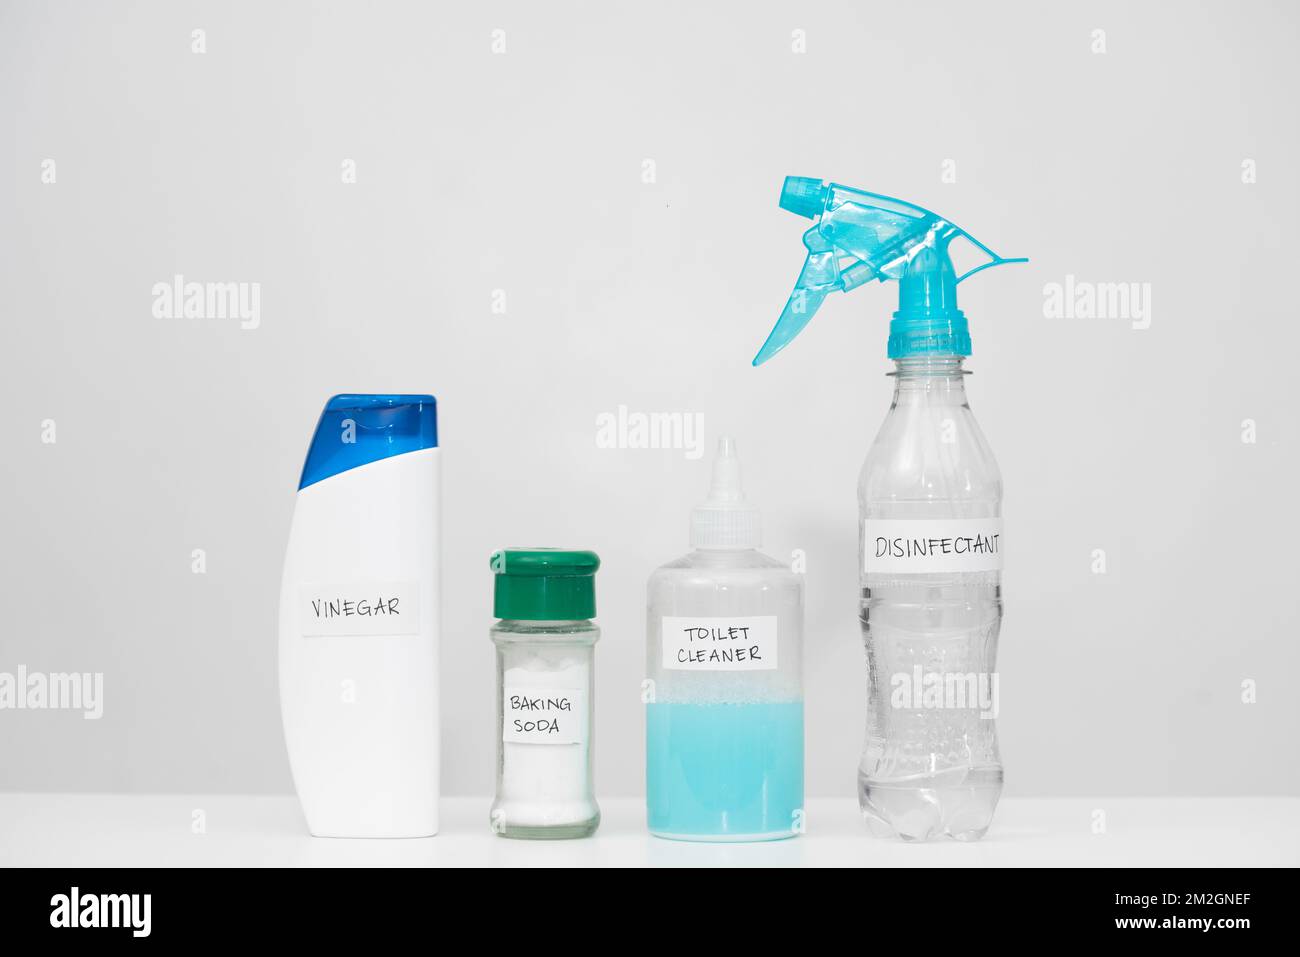 Home cleaning products with labels in reused plastic bottles. Recycled household containers on white background. Horizontal copy space. Reduce concept Stock Photo